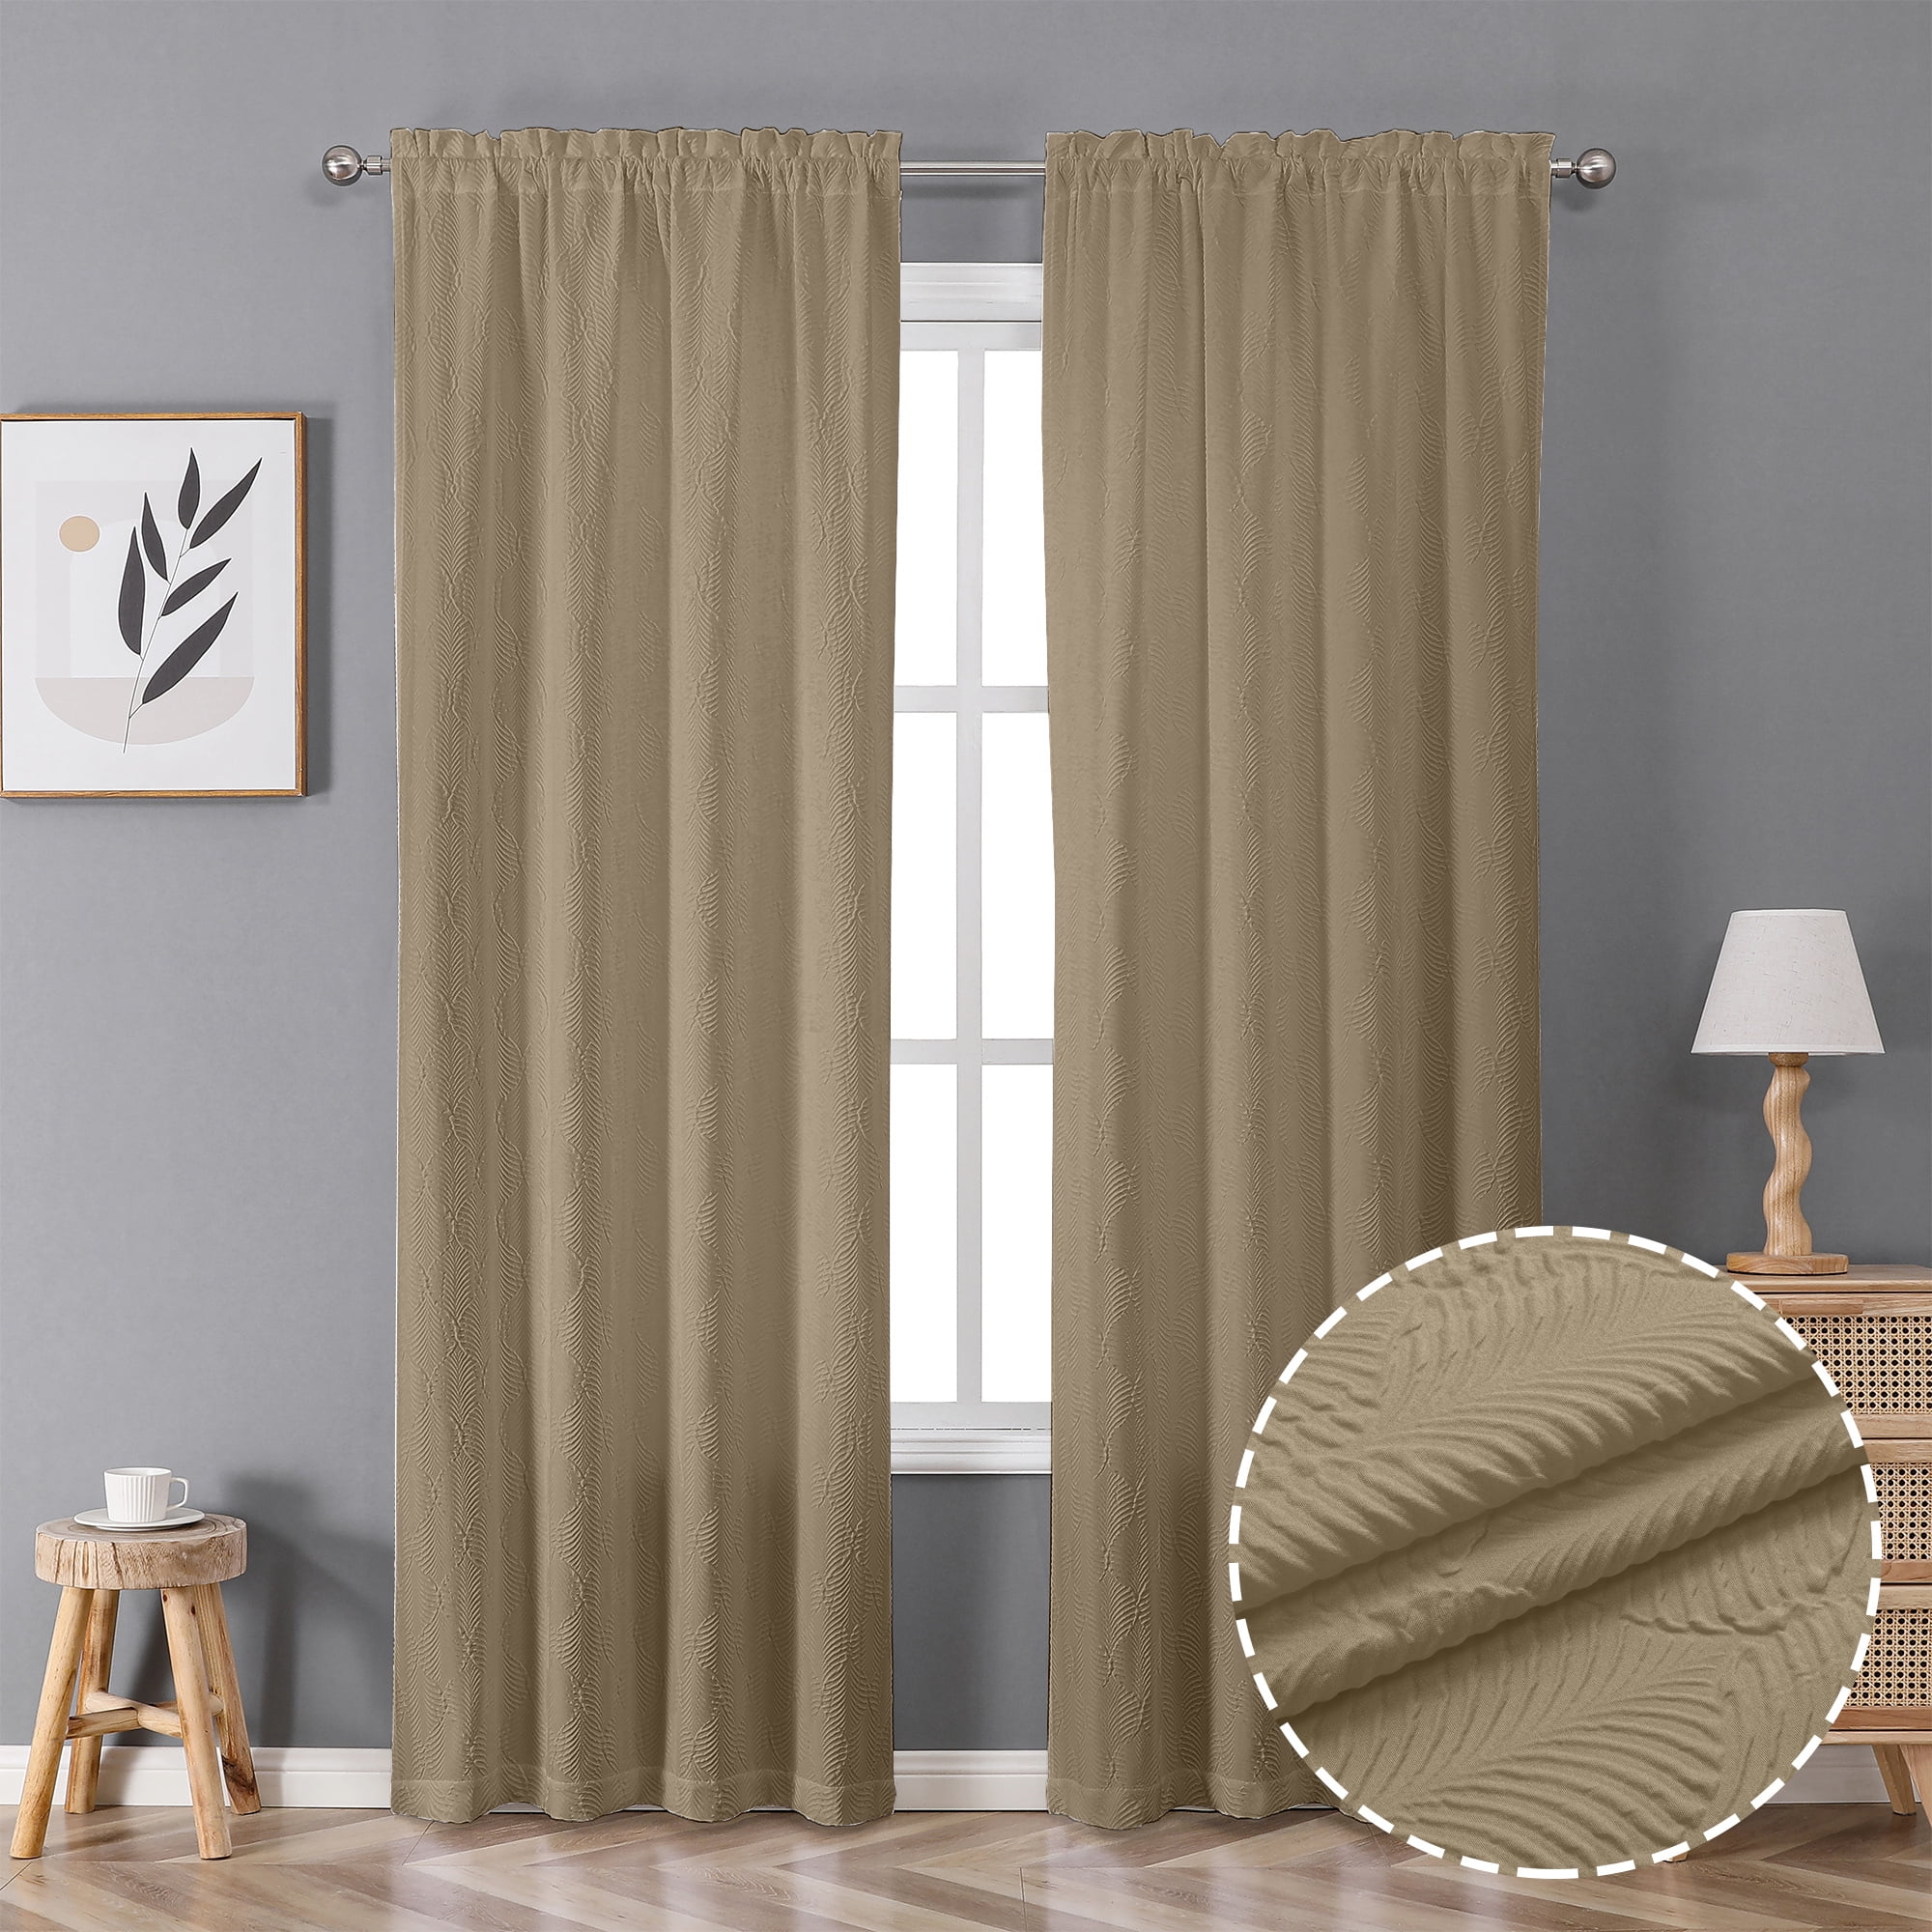 Curtain 4 Set, Better Gardens 74x63 Homes Solid Panel Open & Stitch & Piece Taupe & Sheer Taupe,